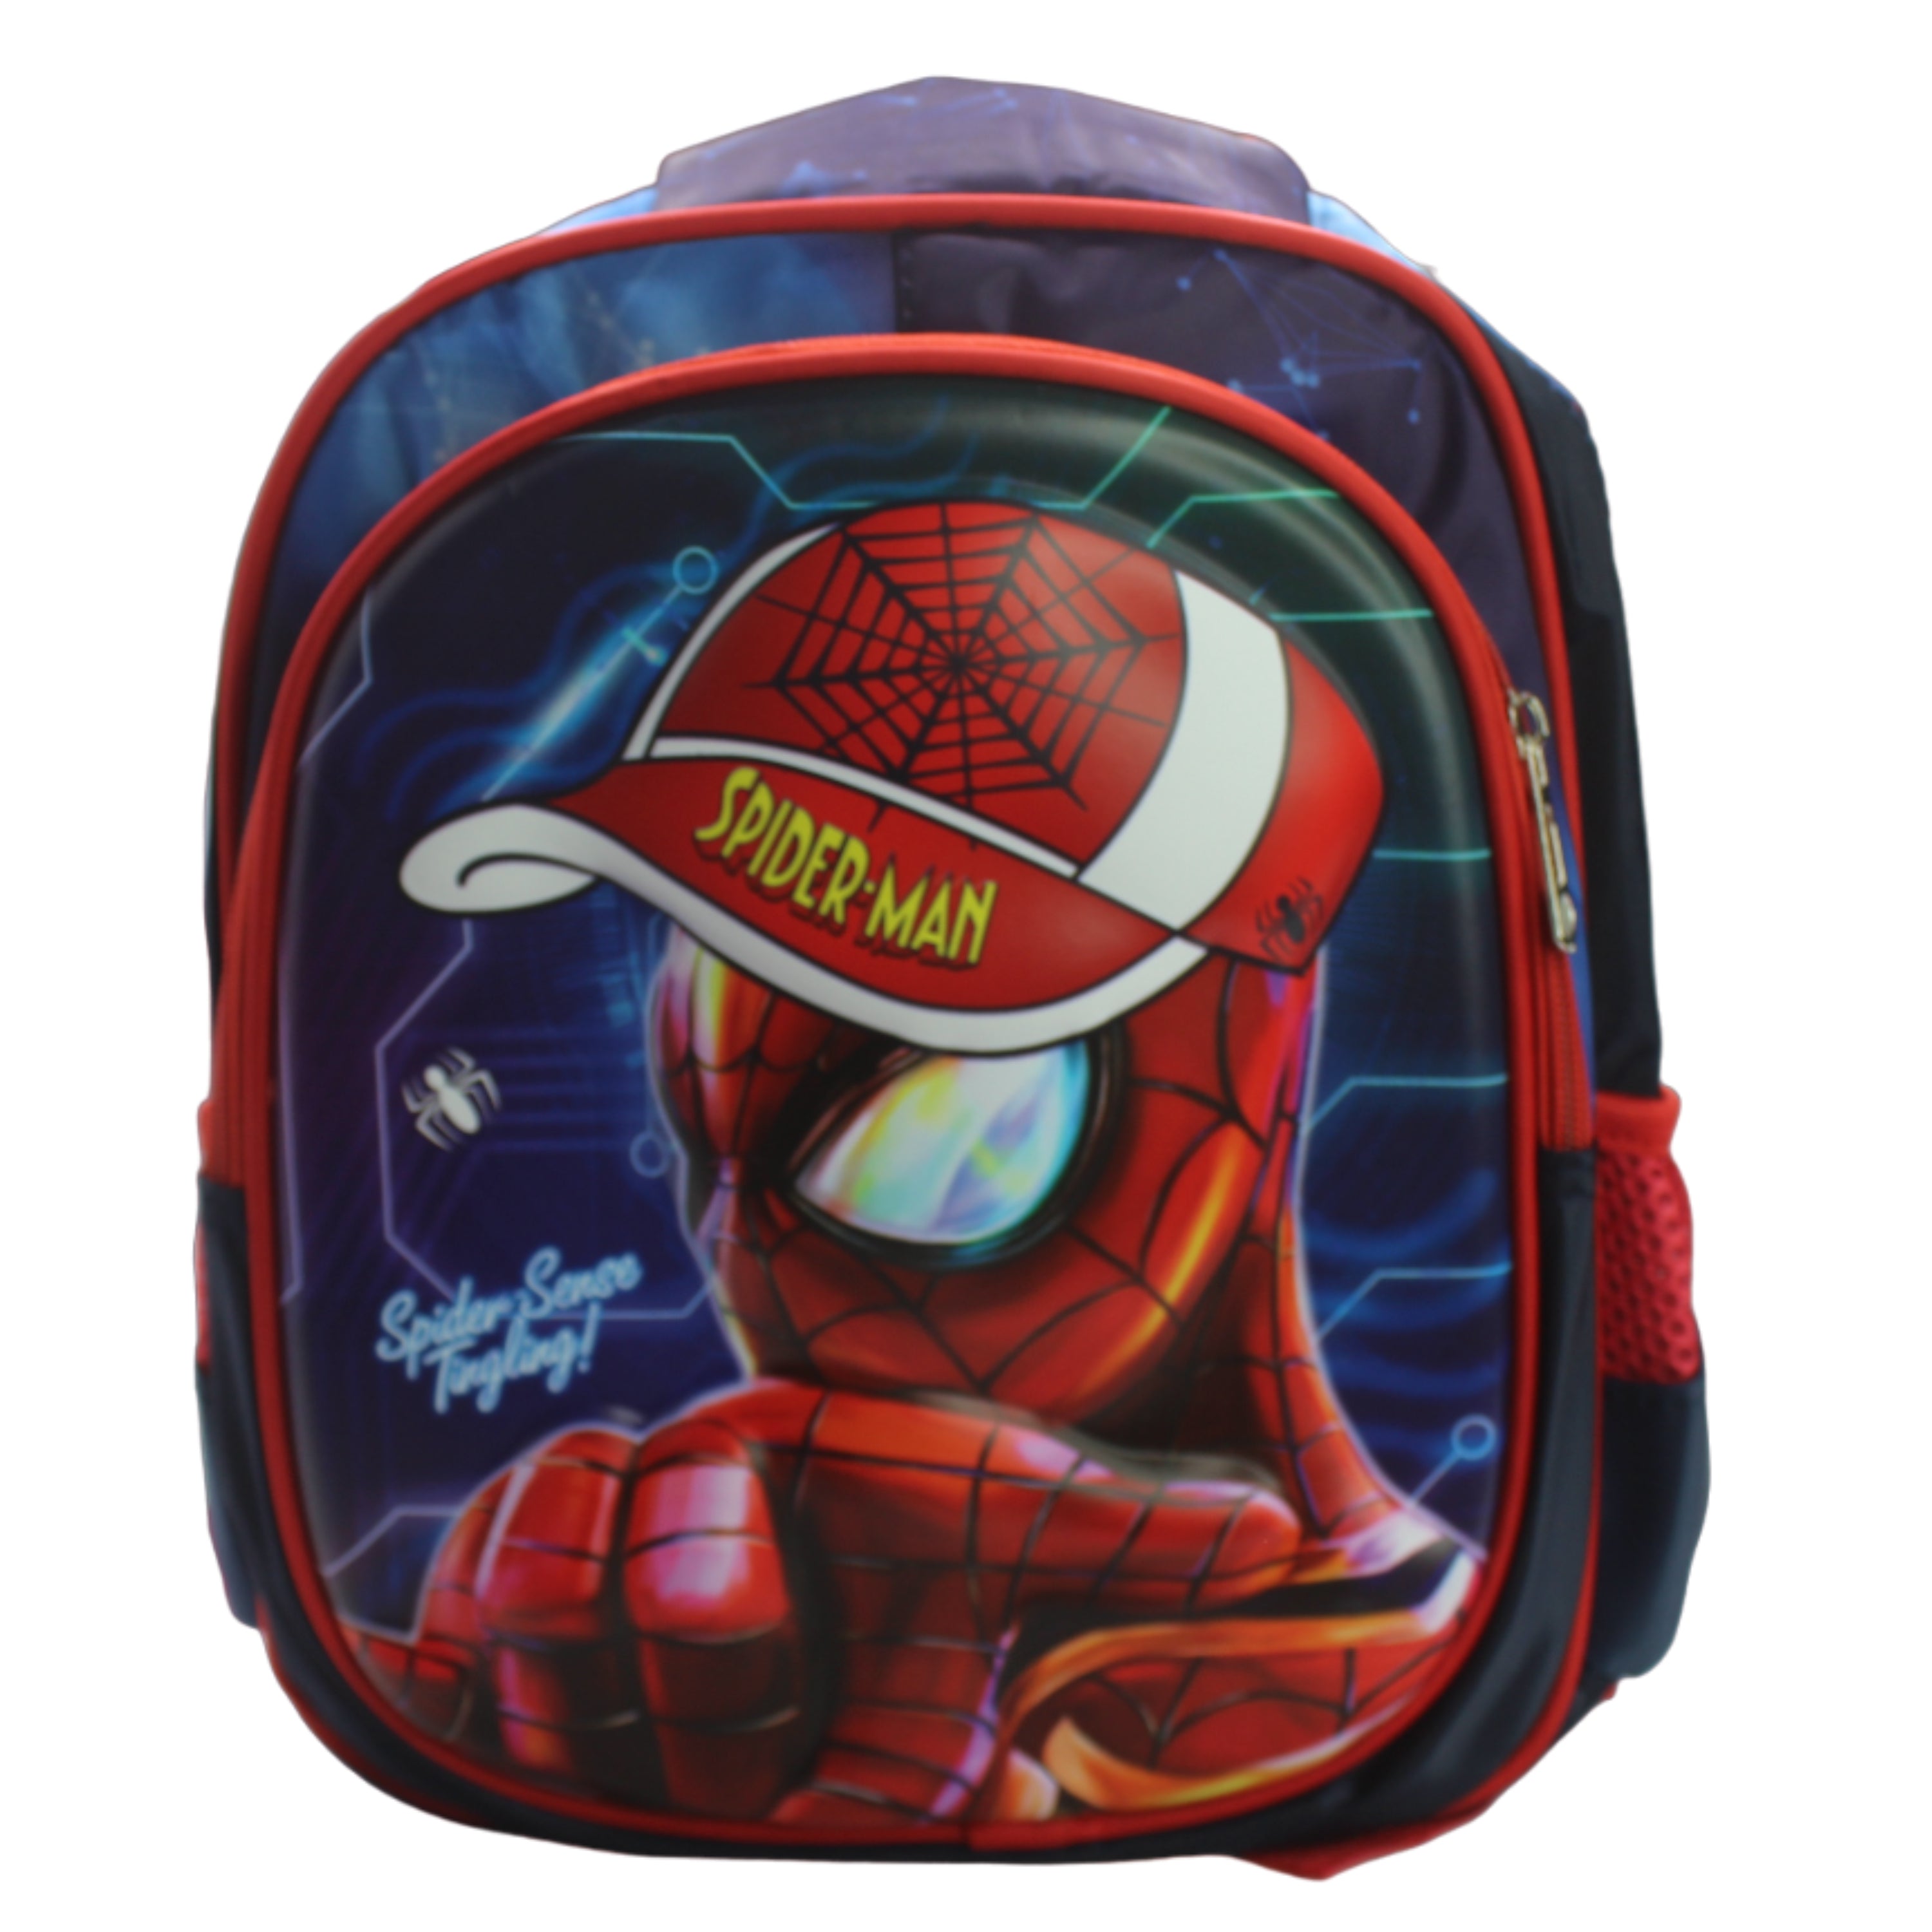 Spiderman School Bag for Boys Class 1 to 2